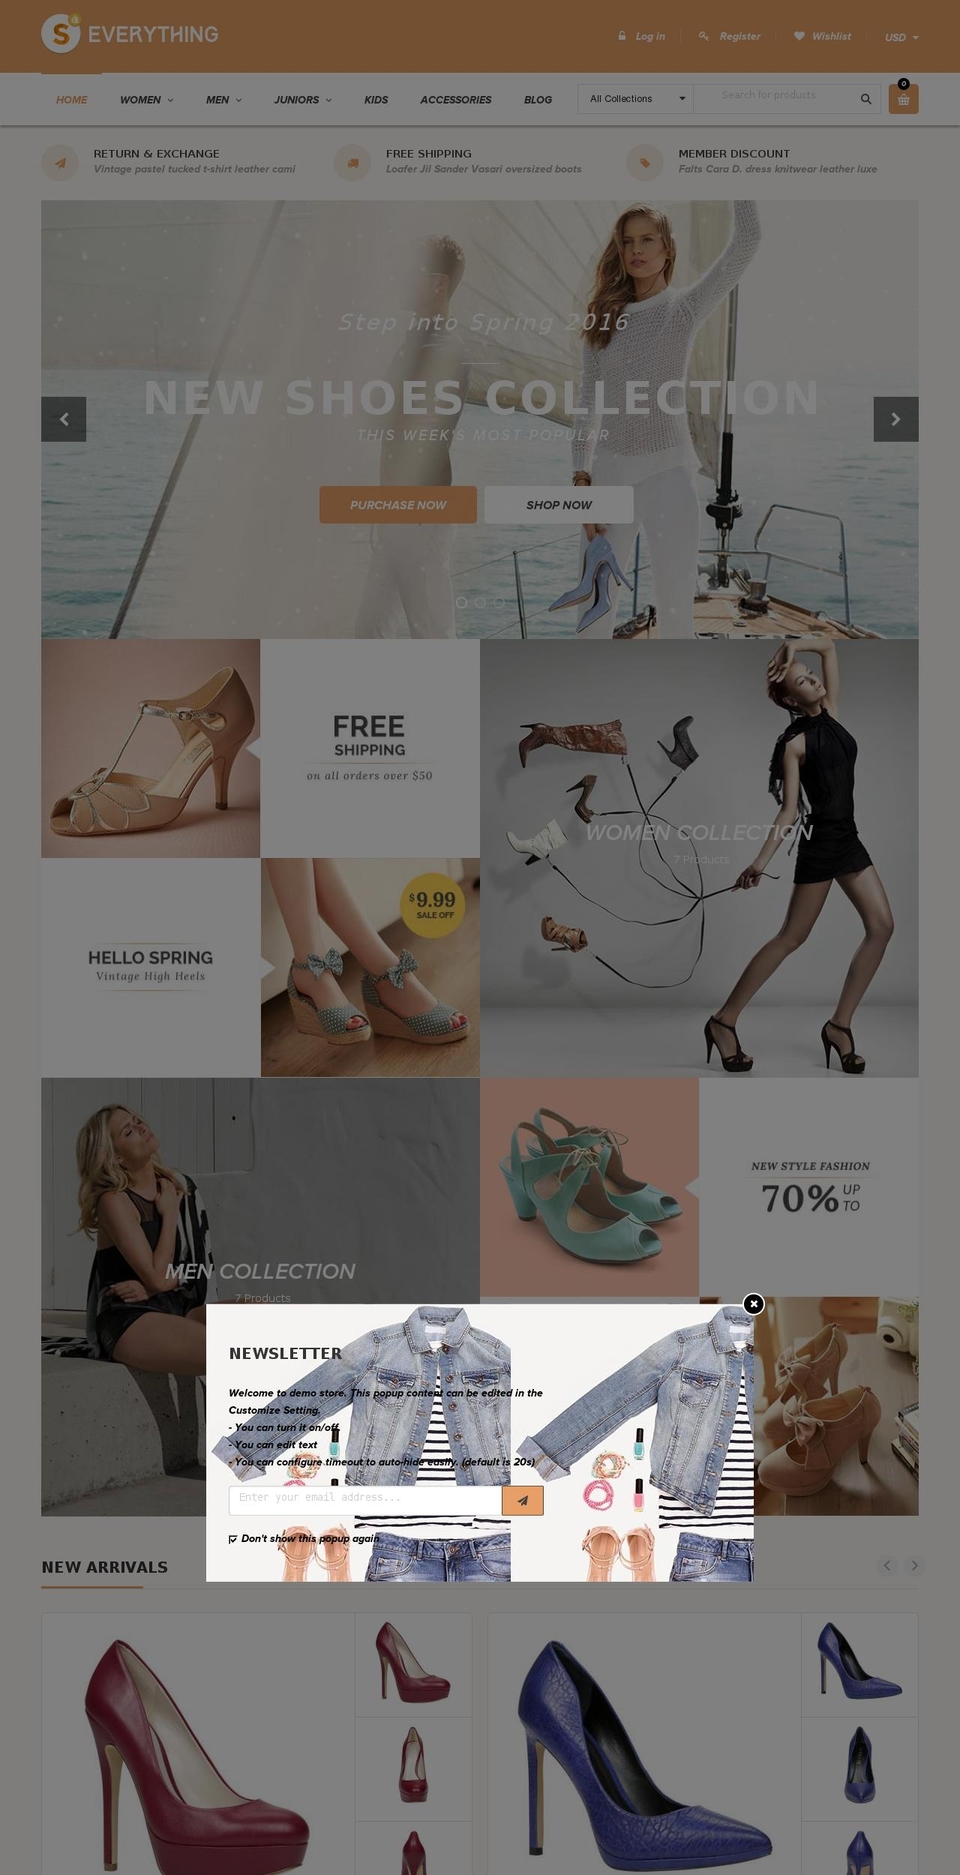 shoes Shopify theme site example cs-everything-shoes.myshopify.com